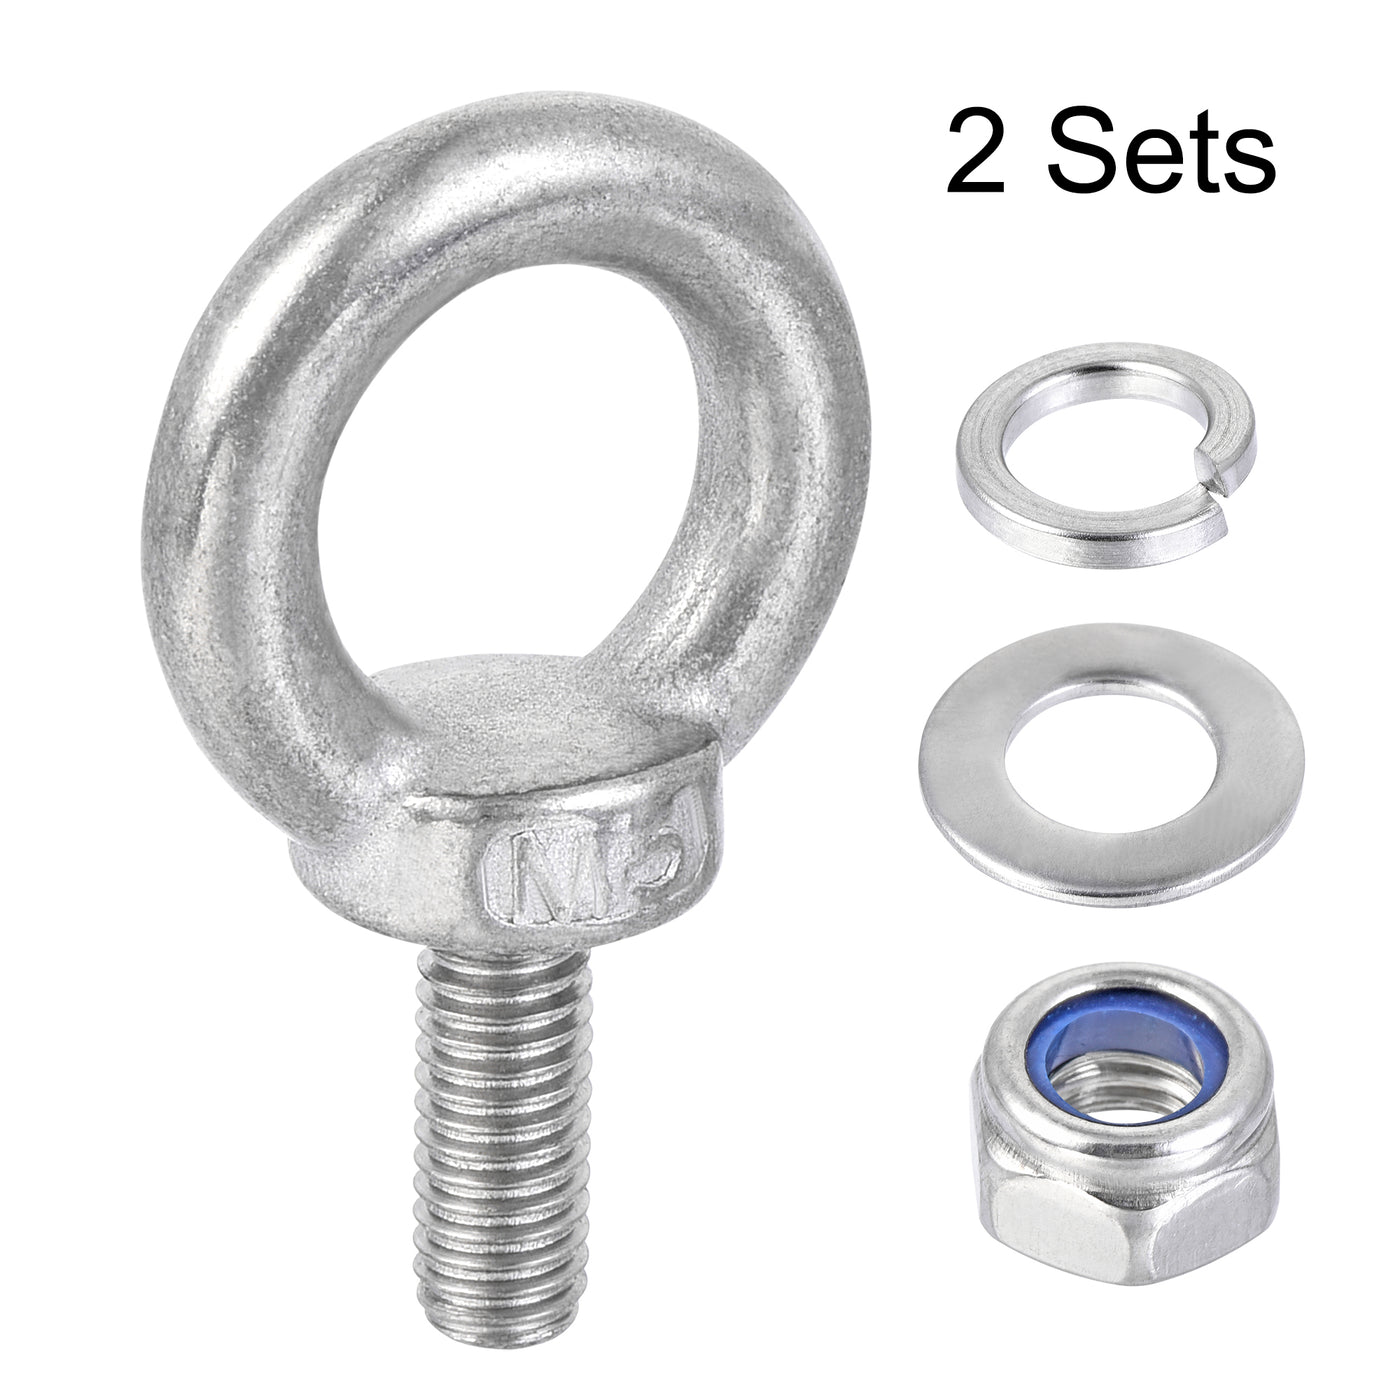 uxcell Uxcell Lifting Eye Bolt M5 x 13mm Male Thread with Hex Screw Nut Gasket Flat Washer for Hanging, 304 Stainless Steel, 2 Sets